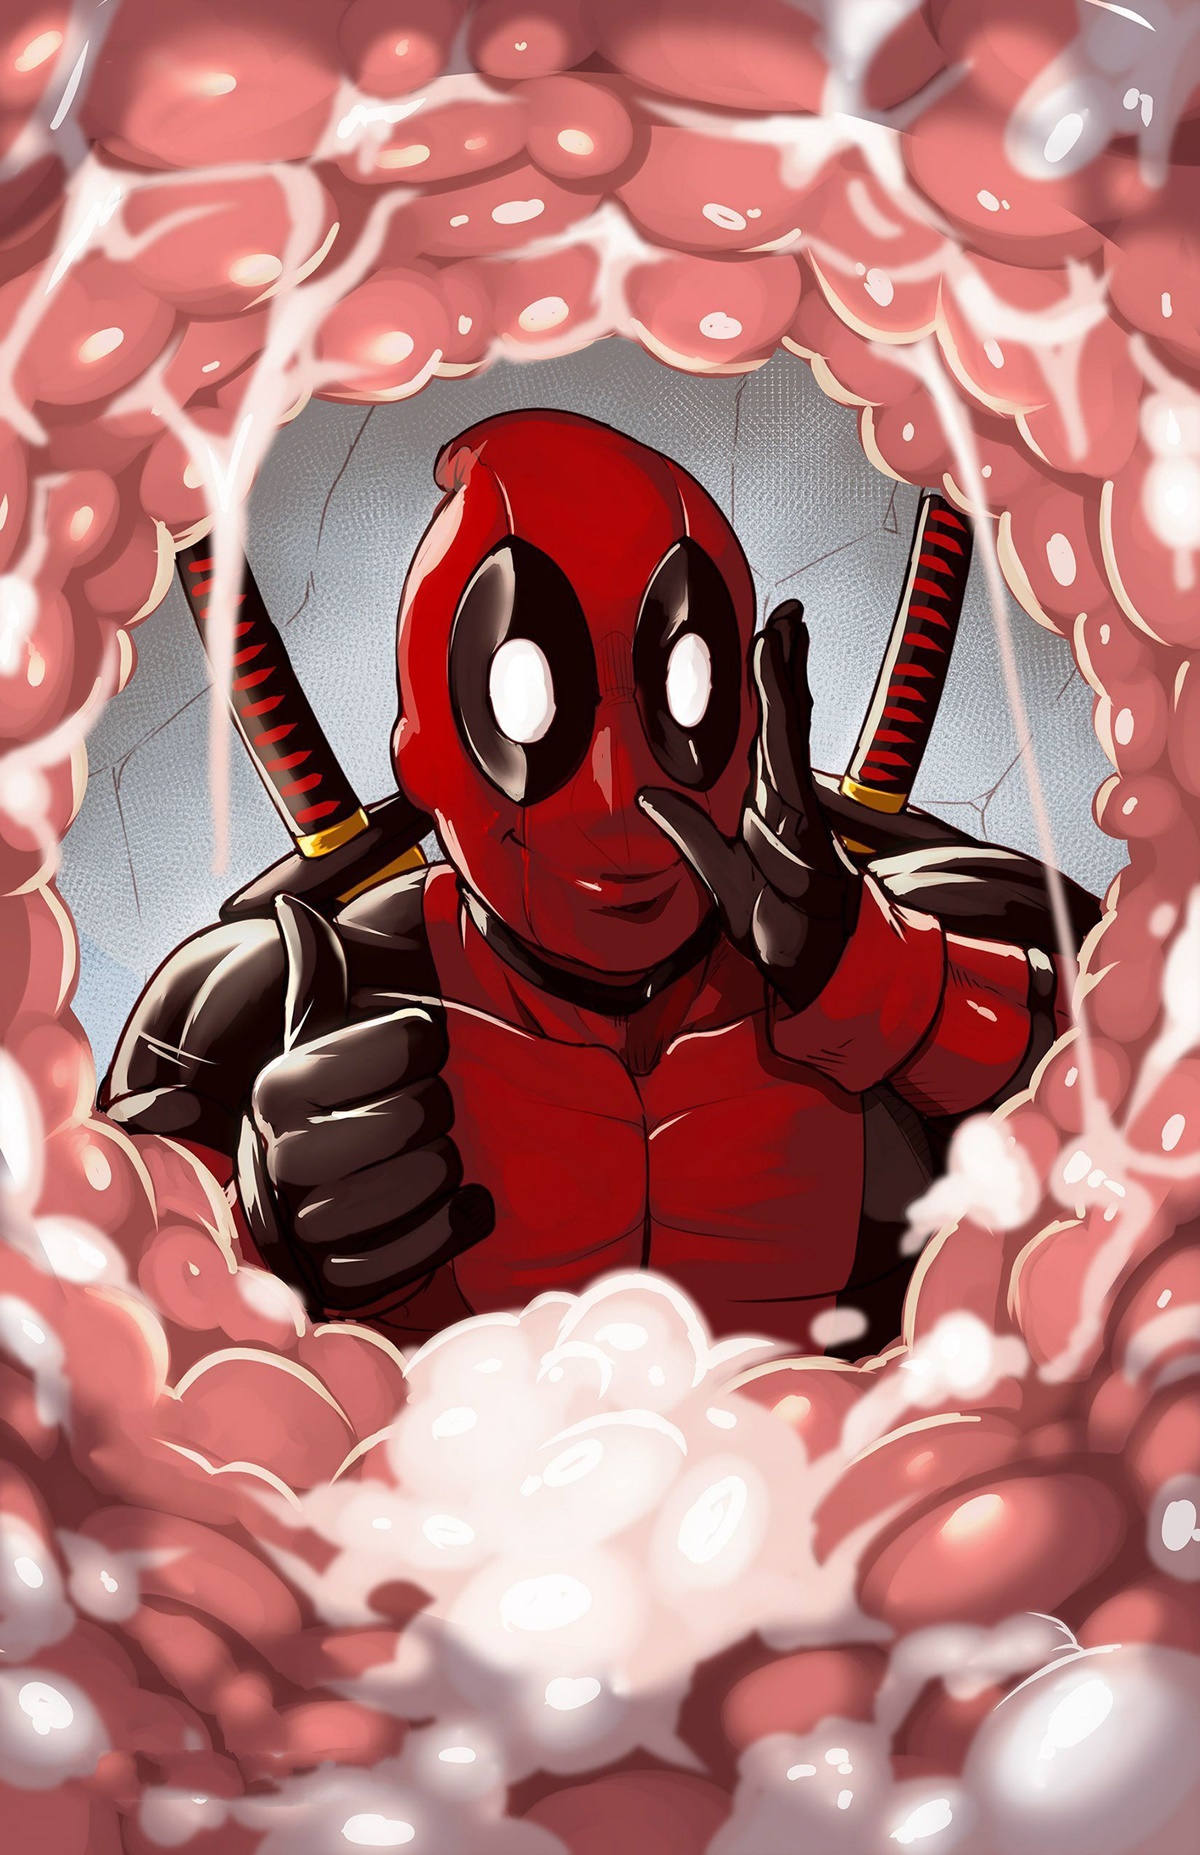 Deadpool Thinking with Portals - 15